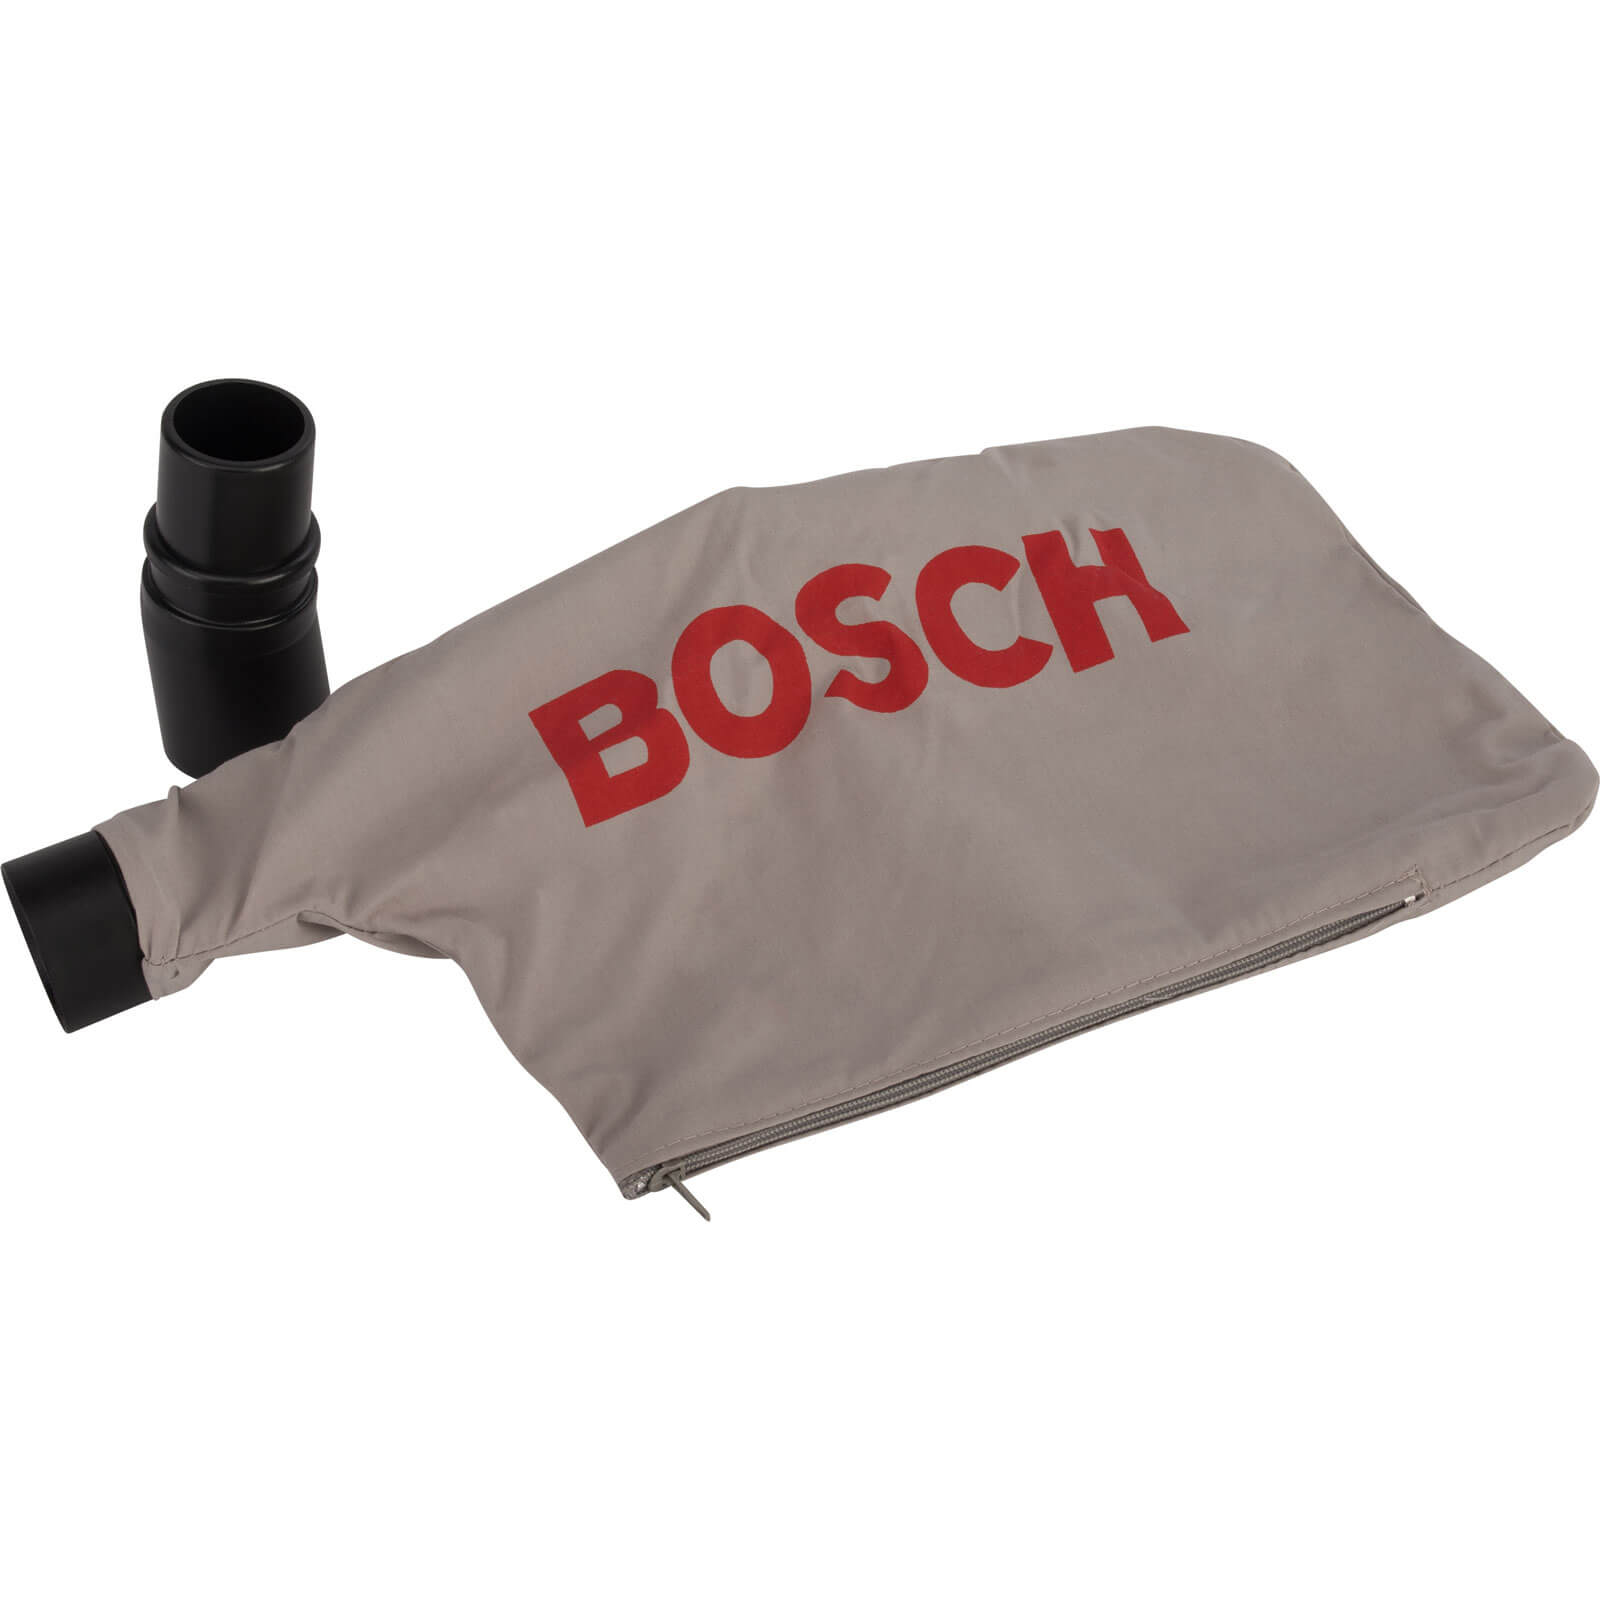 Photo of Bosch Dust Bag And Adaptor For Gcm 12 Sd Mitre Saws